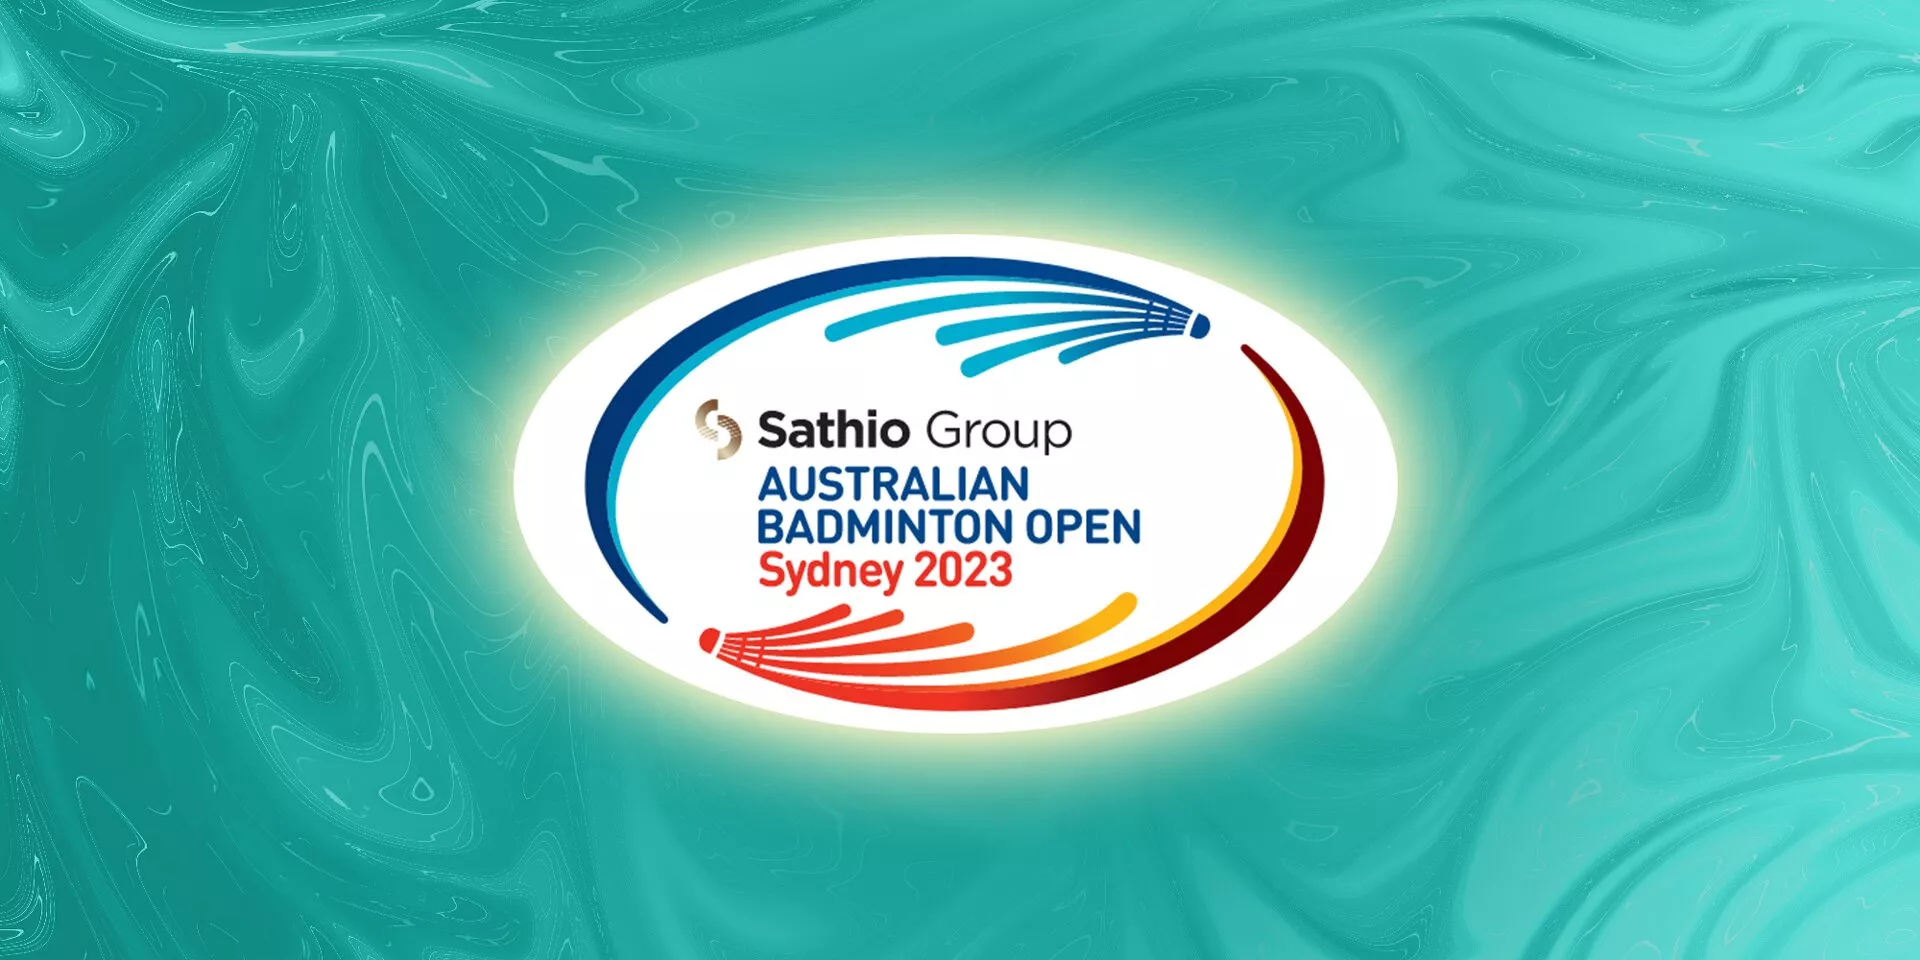 Where and how to watch BWF Australian Open 2023 live in India?